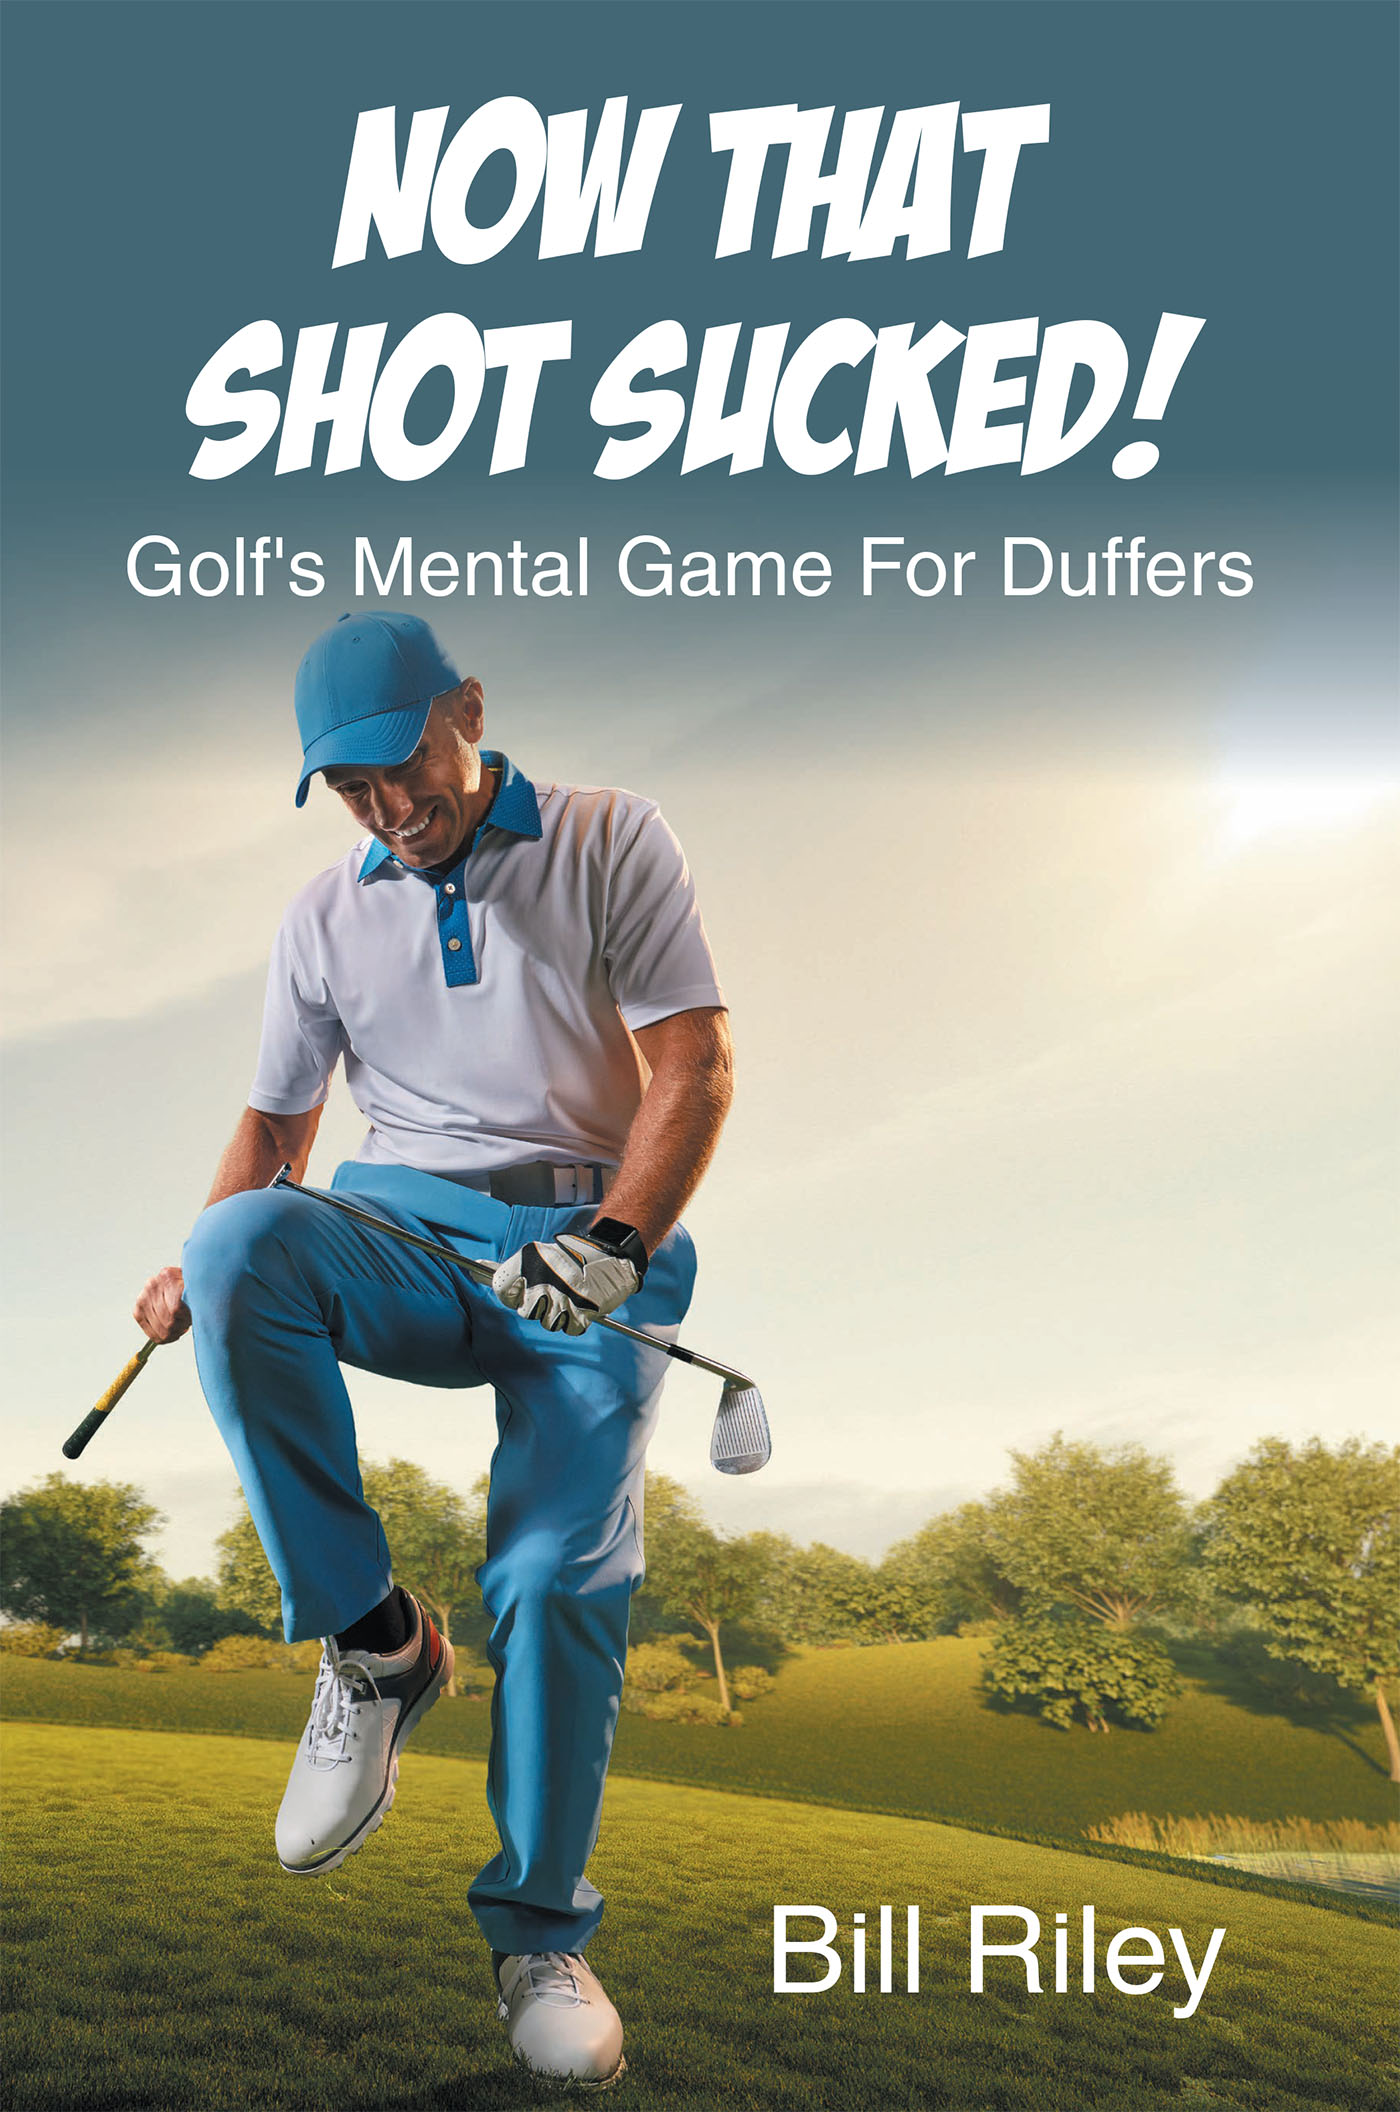 Bill Riley’s New Book, "Now That Shot Sucked! Golf's Mental Game For Duffers," is a Useful Guide for Golfers Looking to Improve Their Skills and Enjoy the Game More